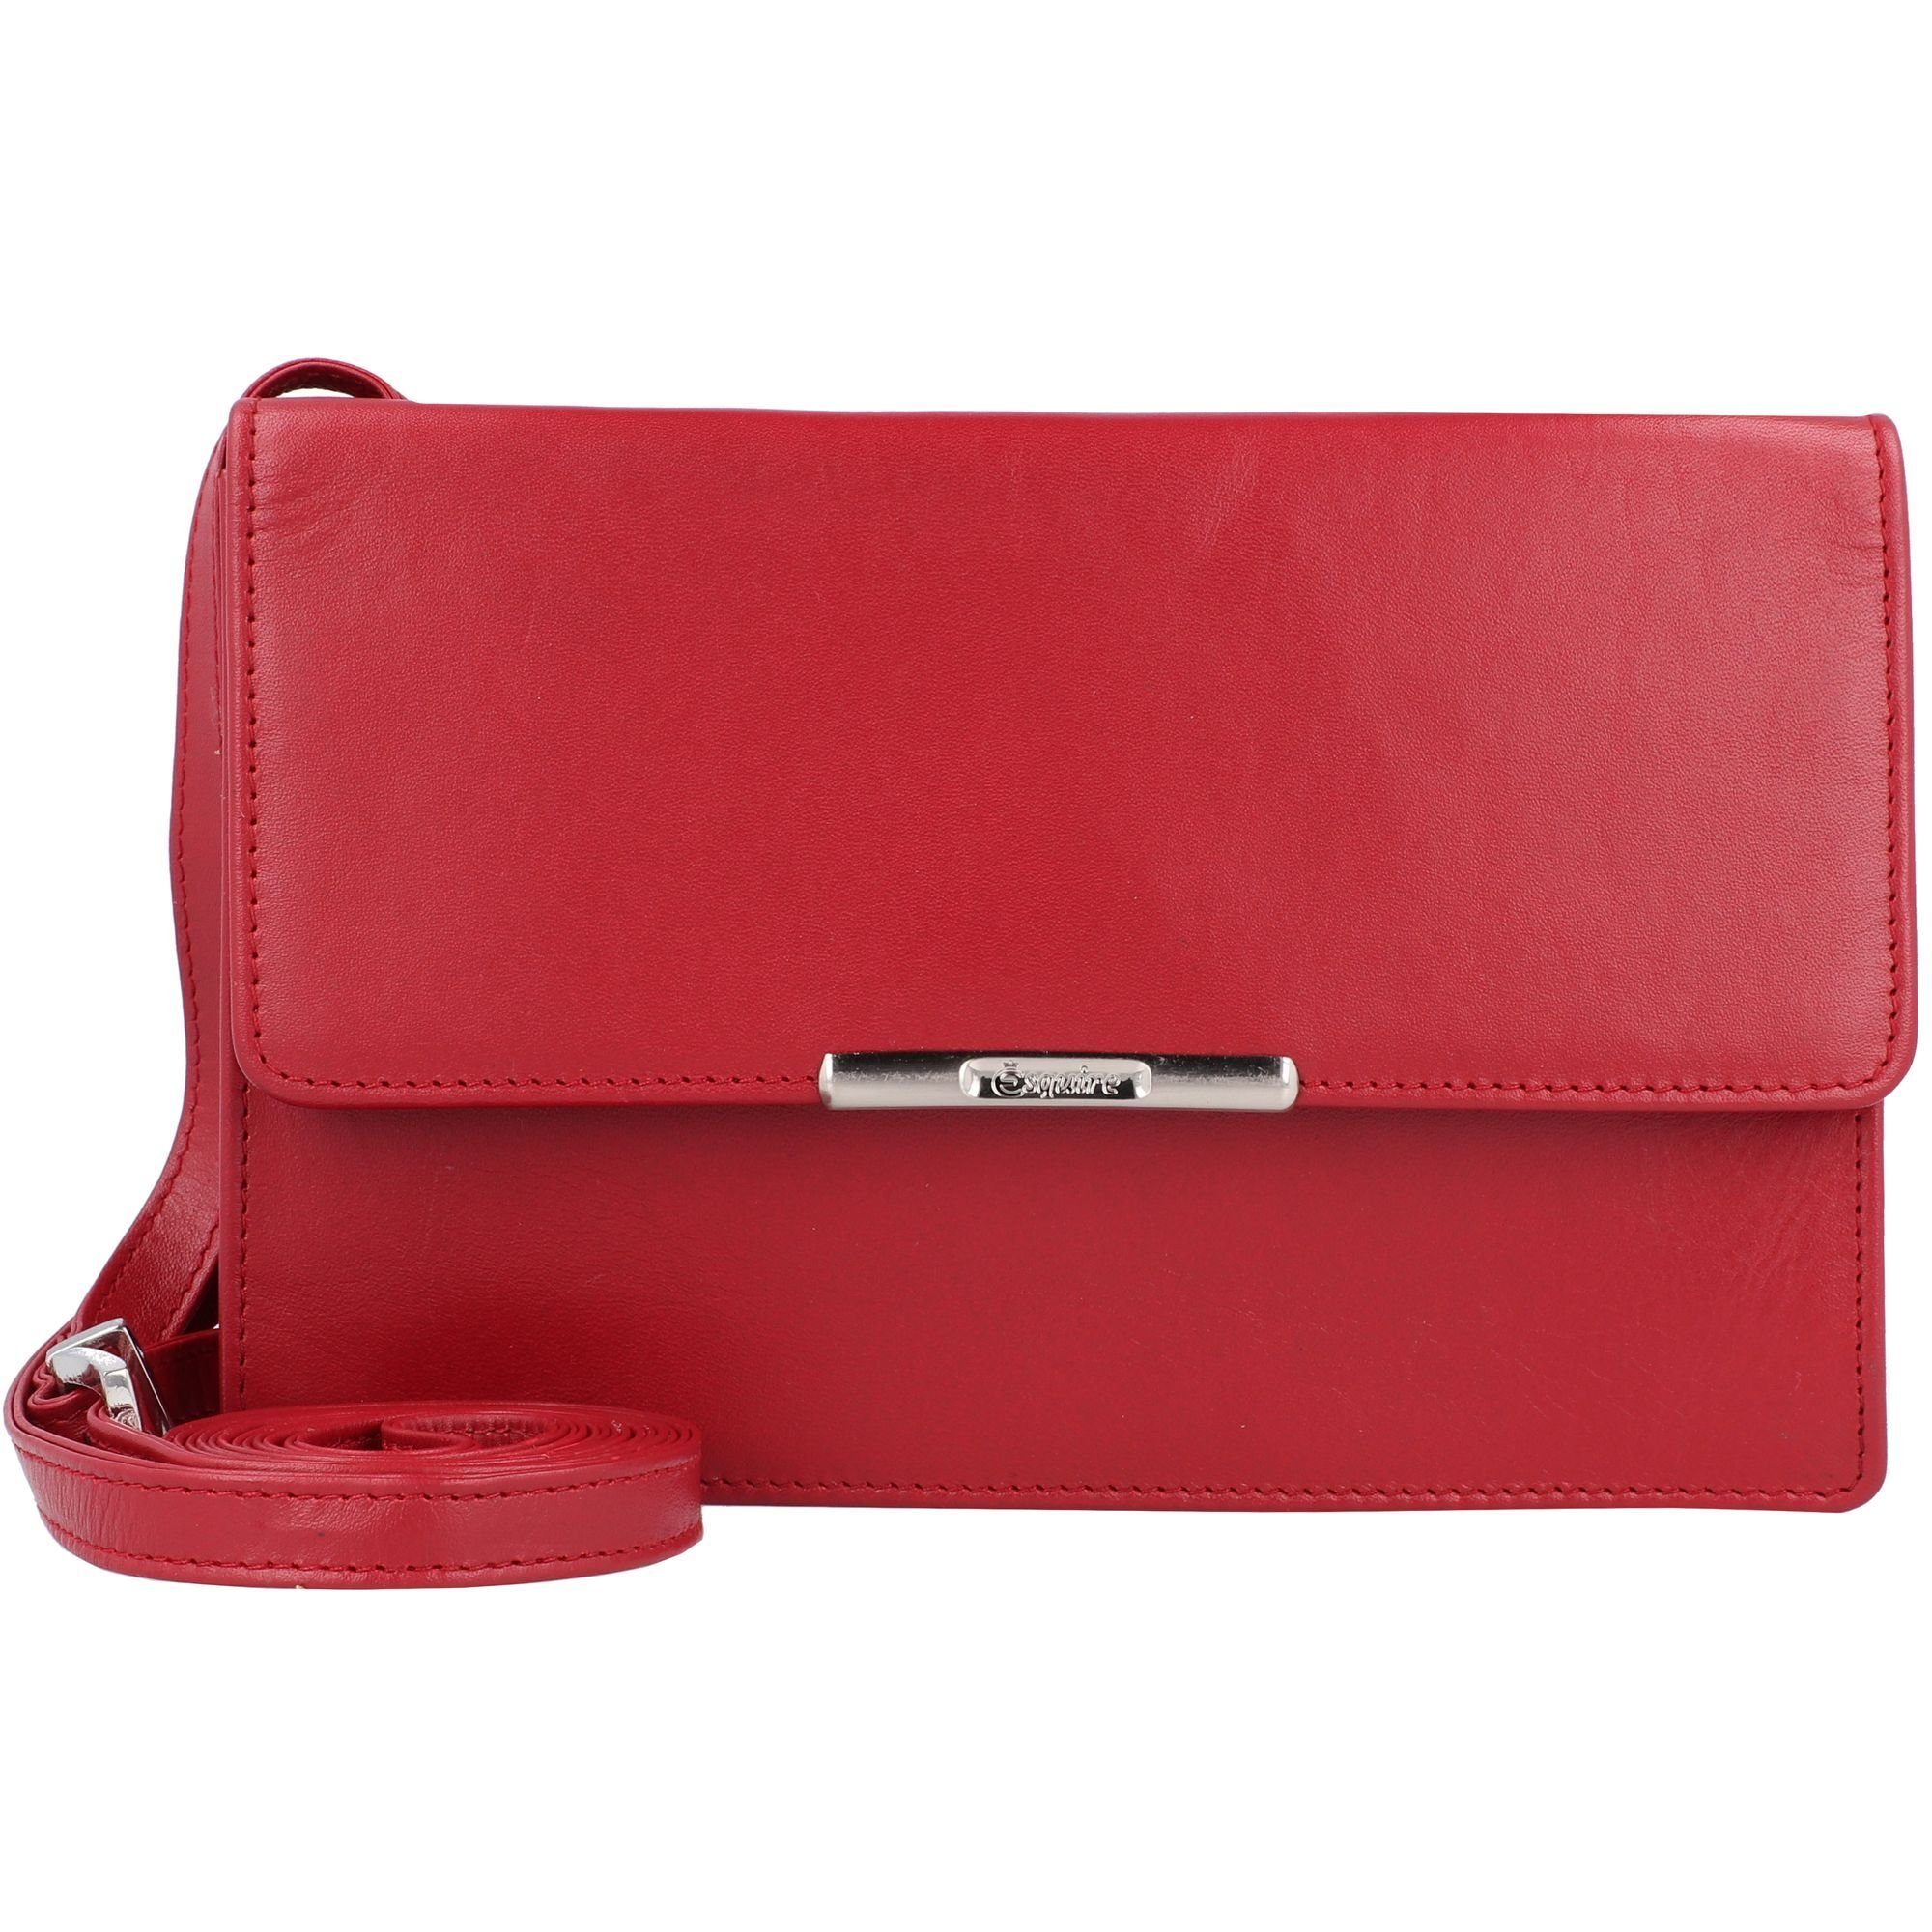 Esquire Clutch Helena, Leder rot